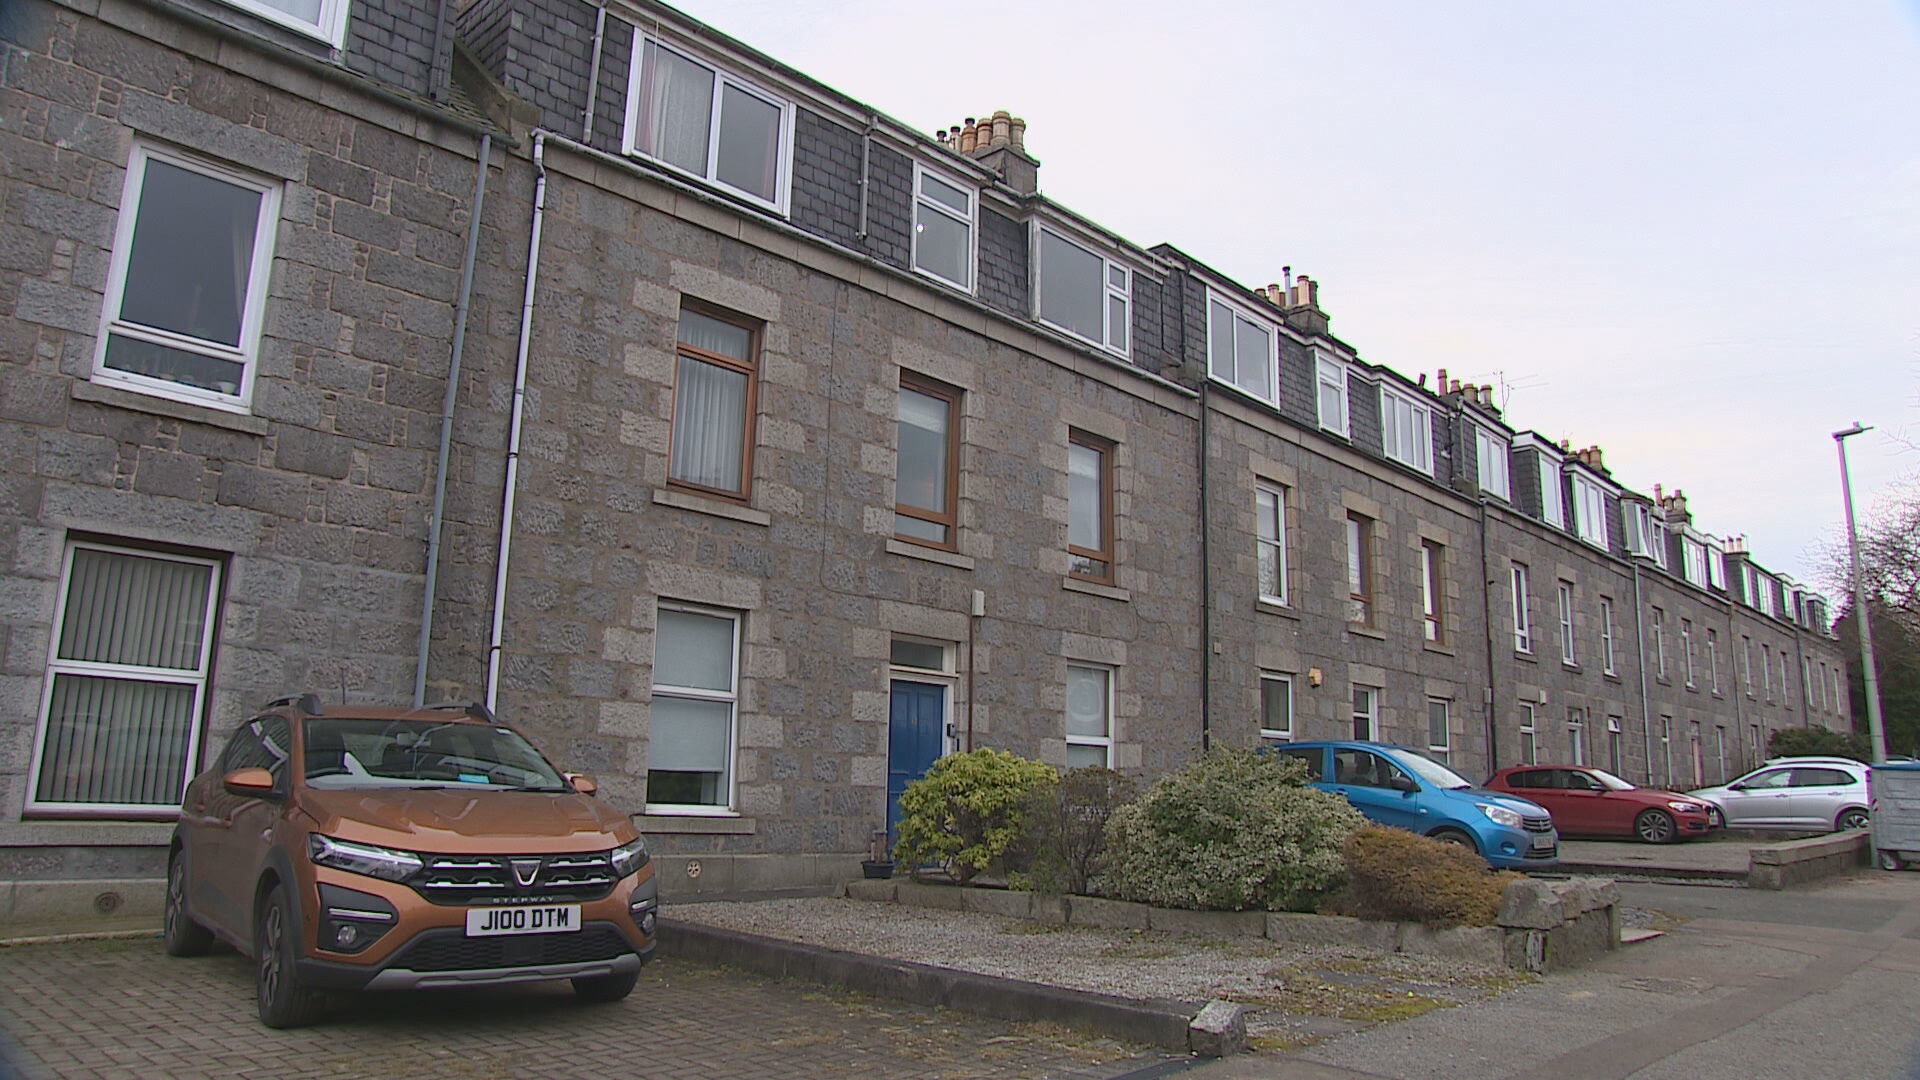 The property on Allan Street where Brenda Page's body was found in Aberdeen.